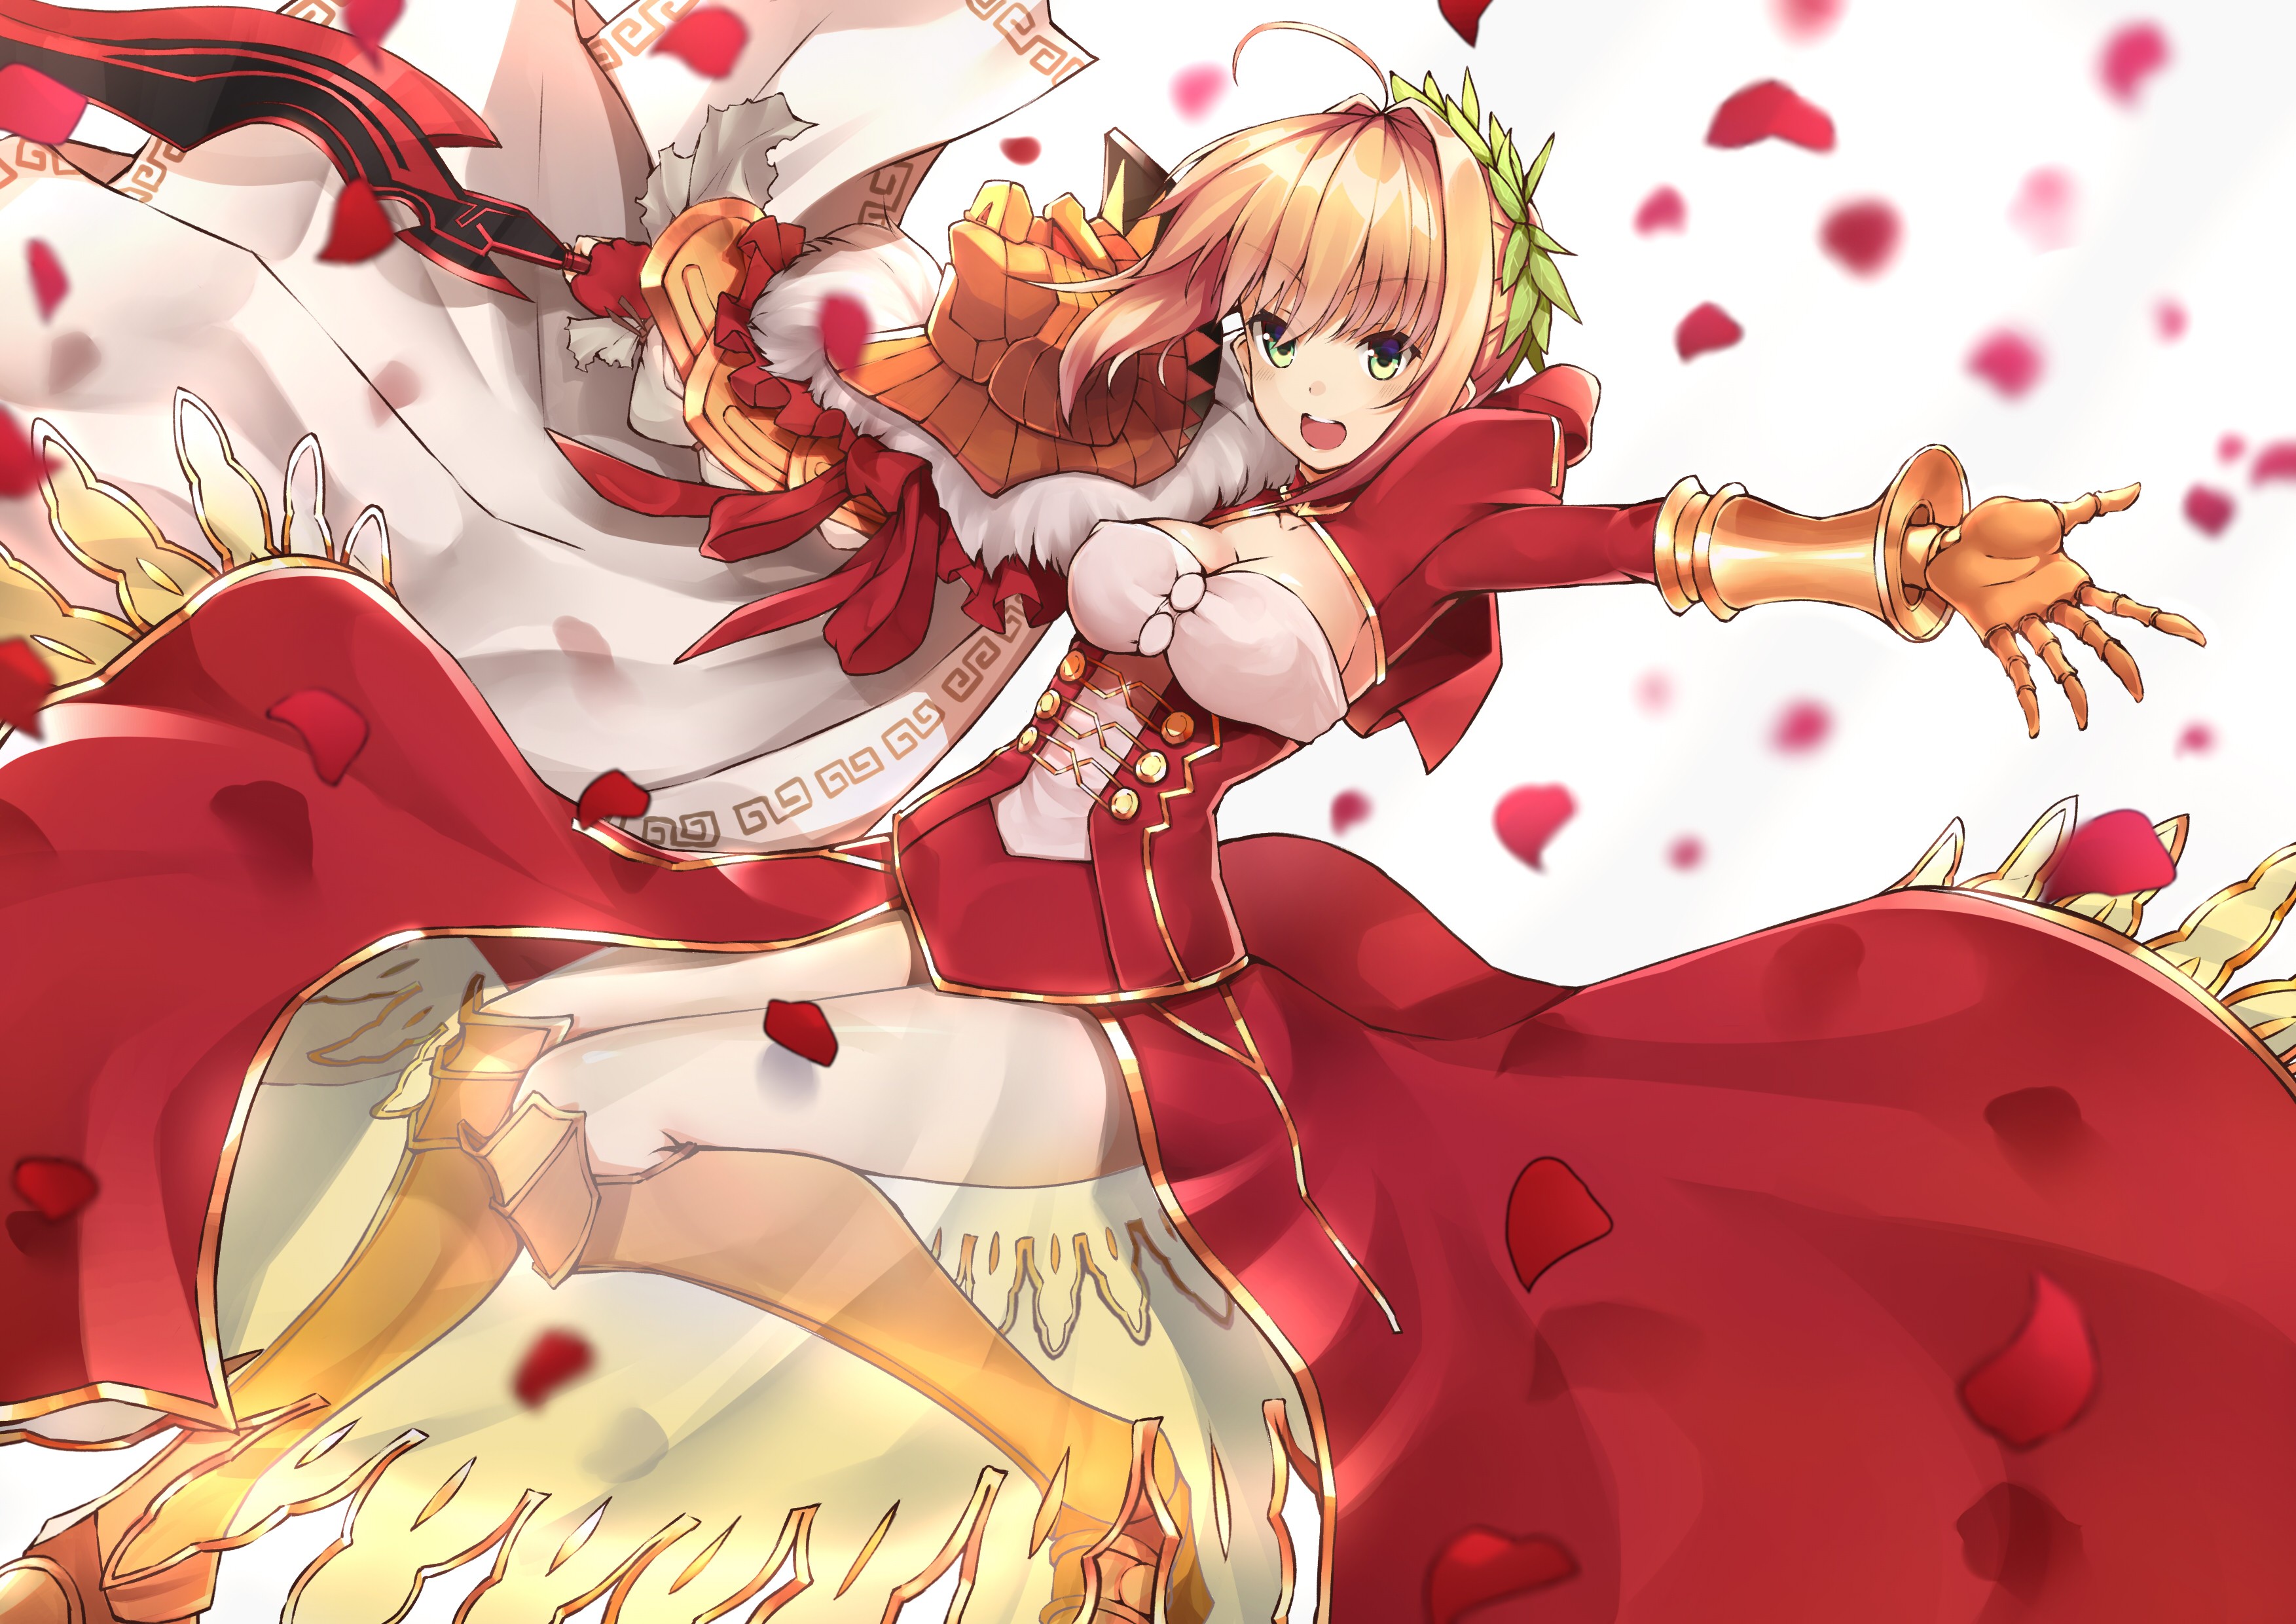 Anime Anime Girls Fate Extra Fate Stay Night Saber Extra Armor Dress Heels Sword Short Hair Blonde G 3507x2480